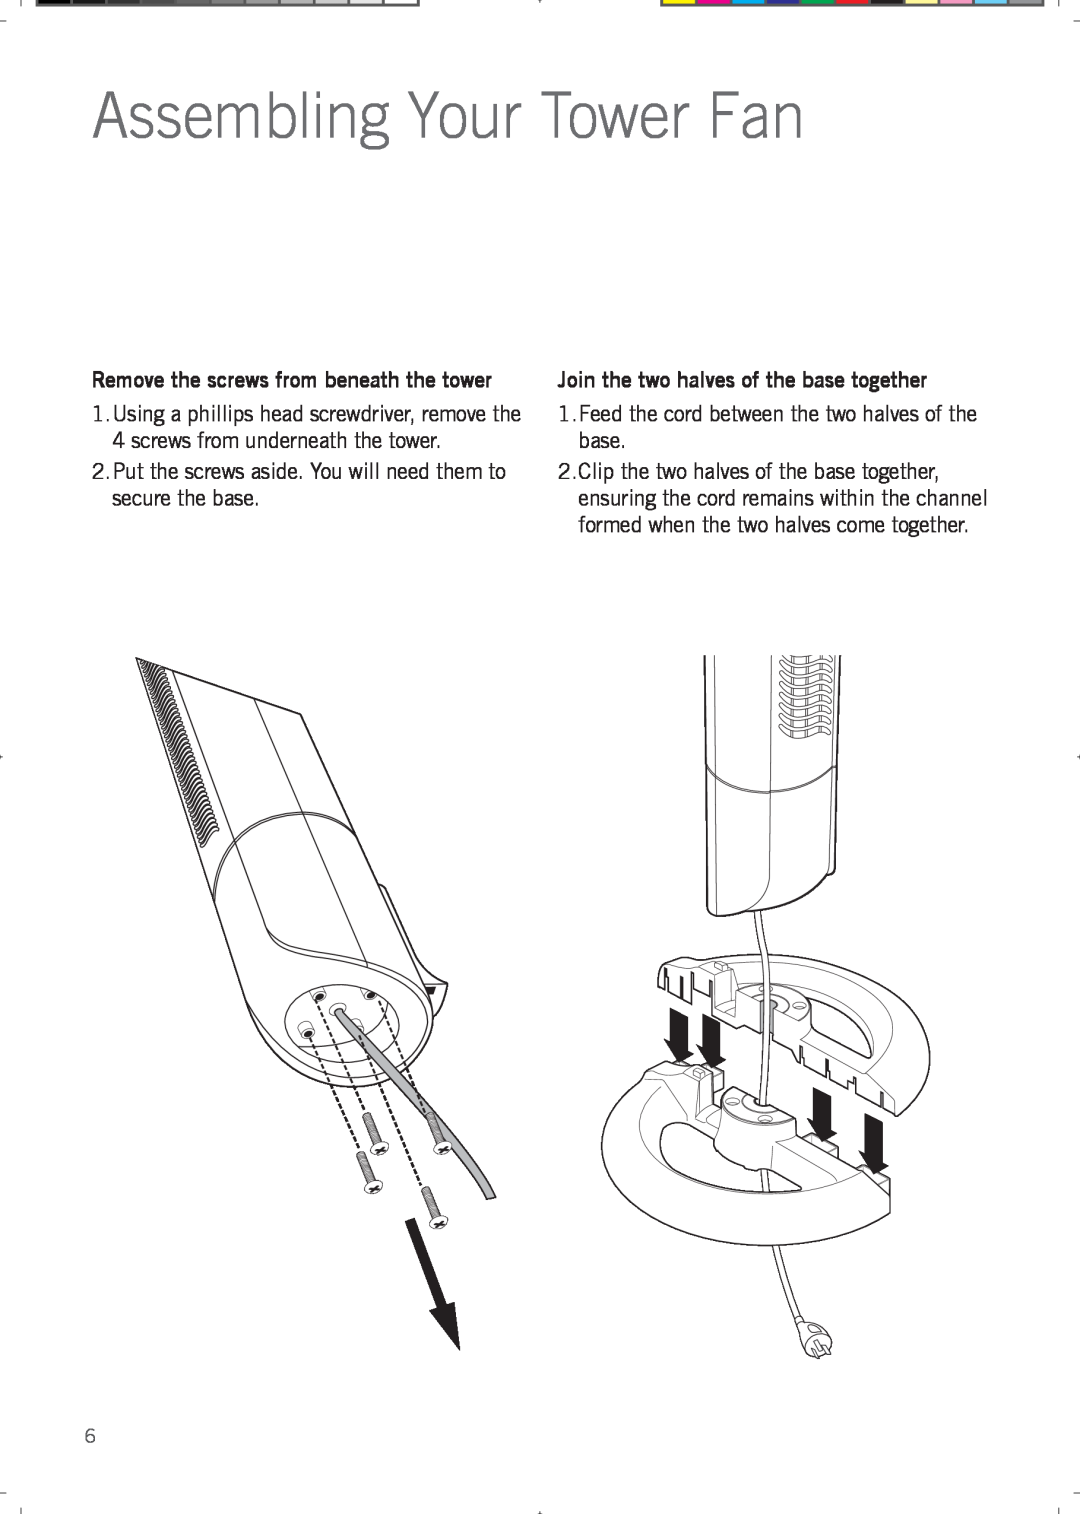 Sunbeam FA7200 manual Assembling Your Tower Fan, Remove the screws from beneath the tower 